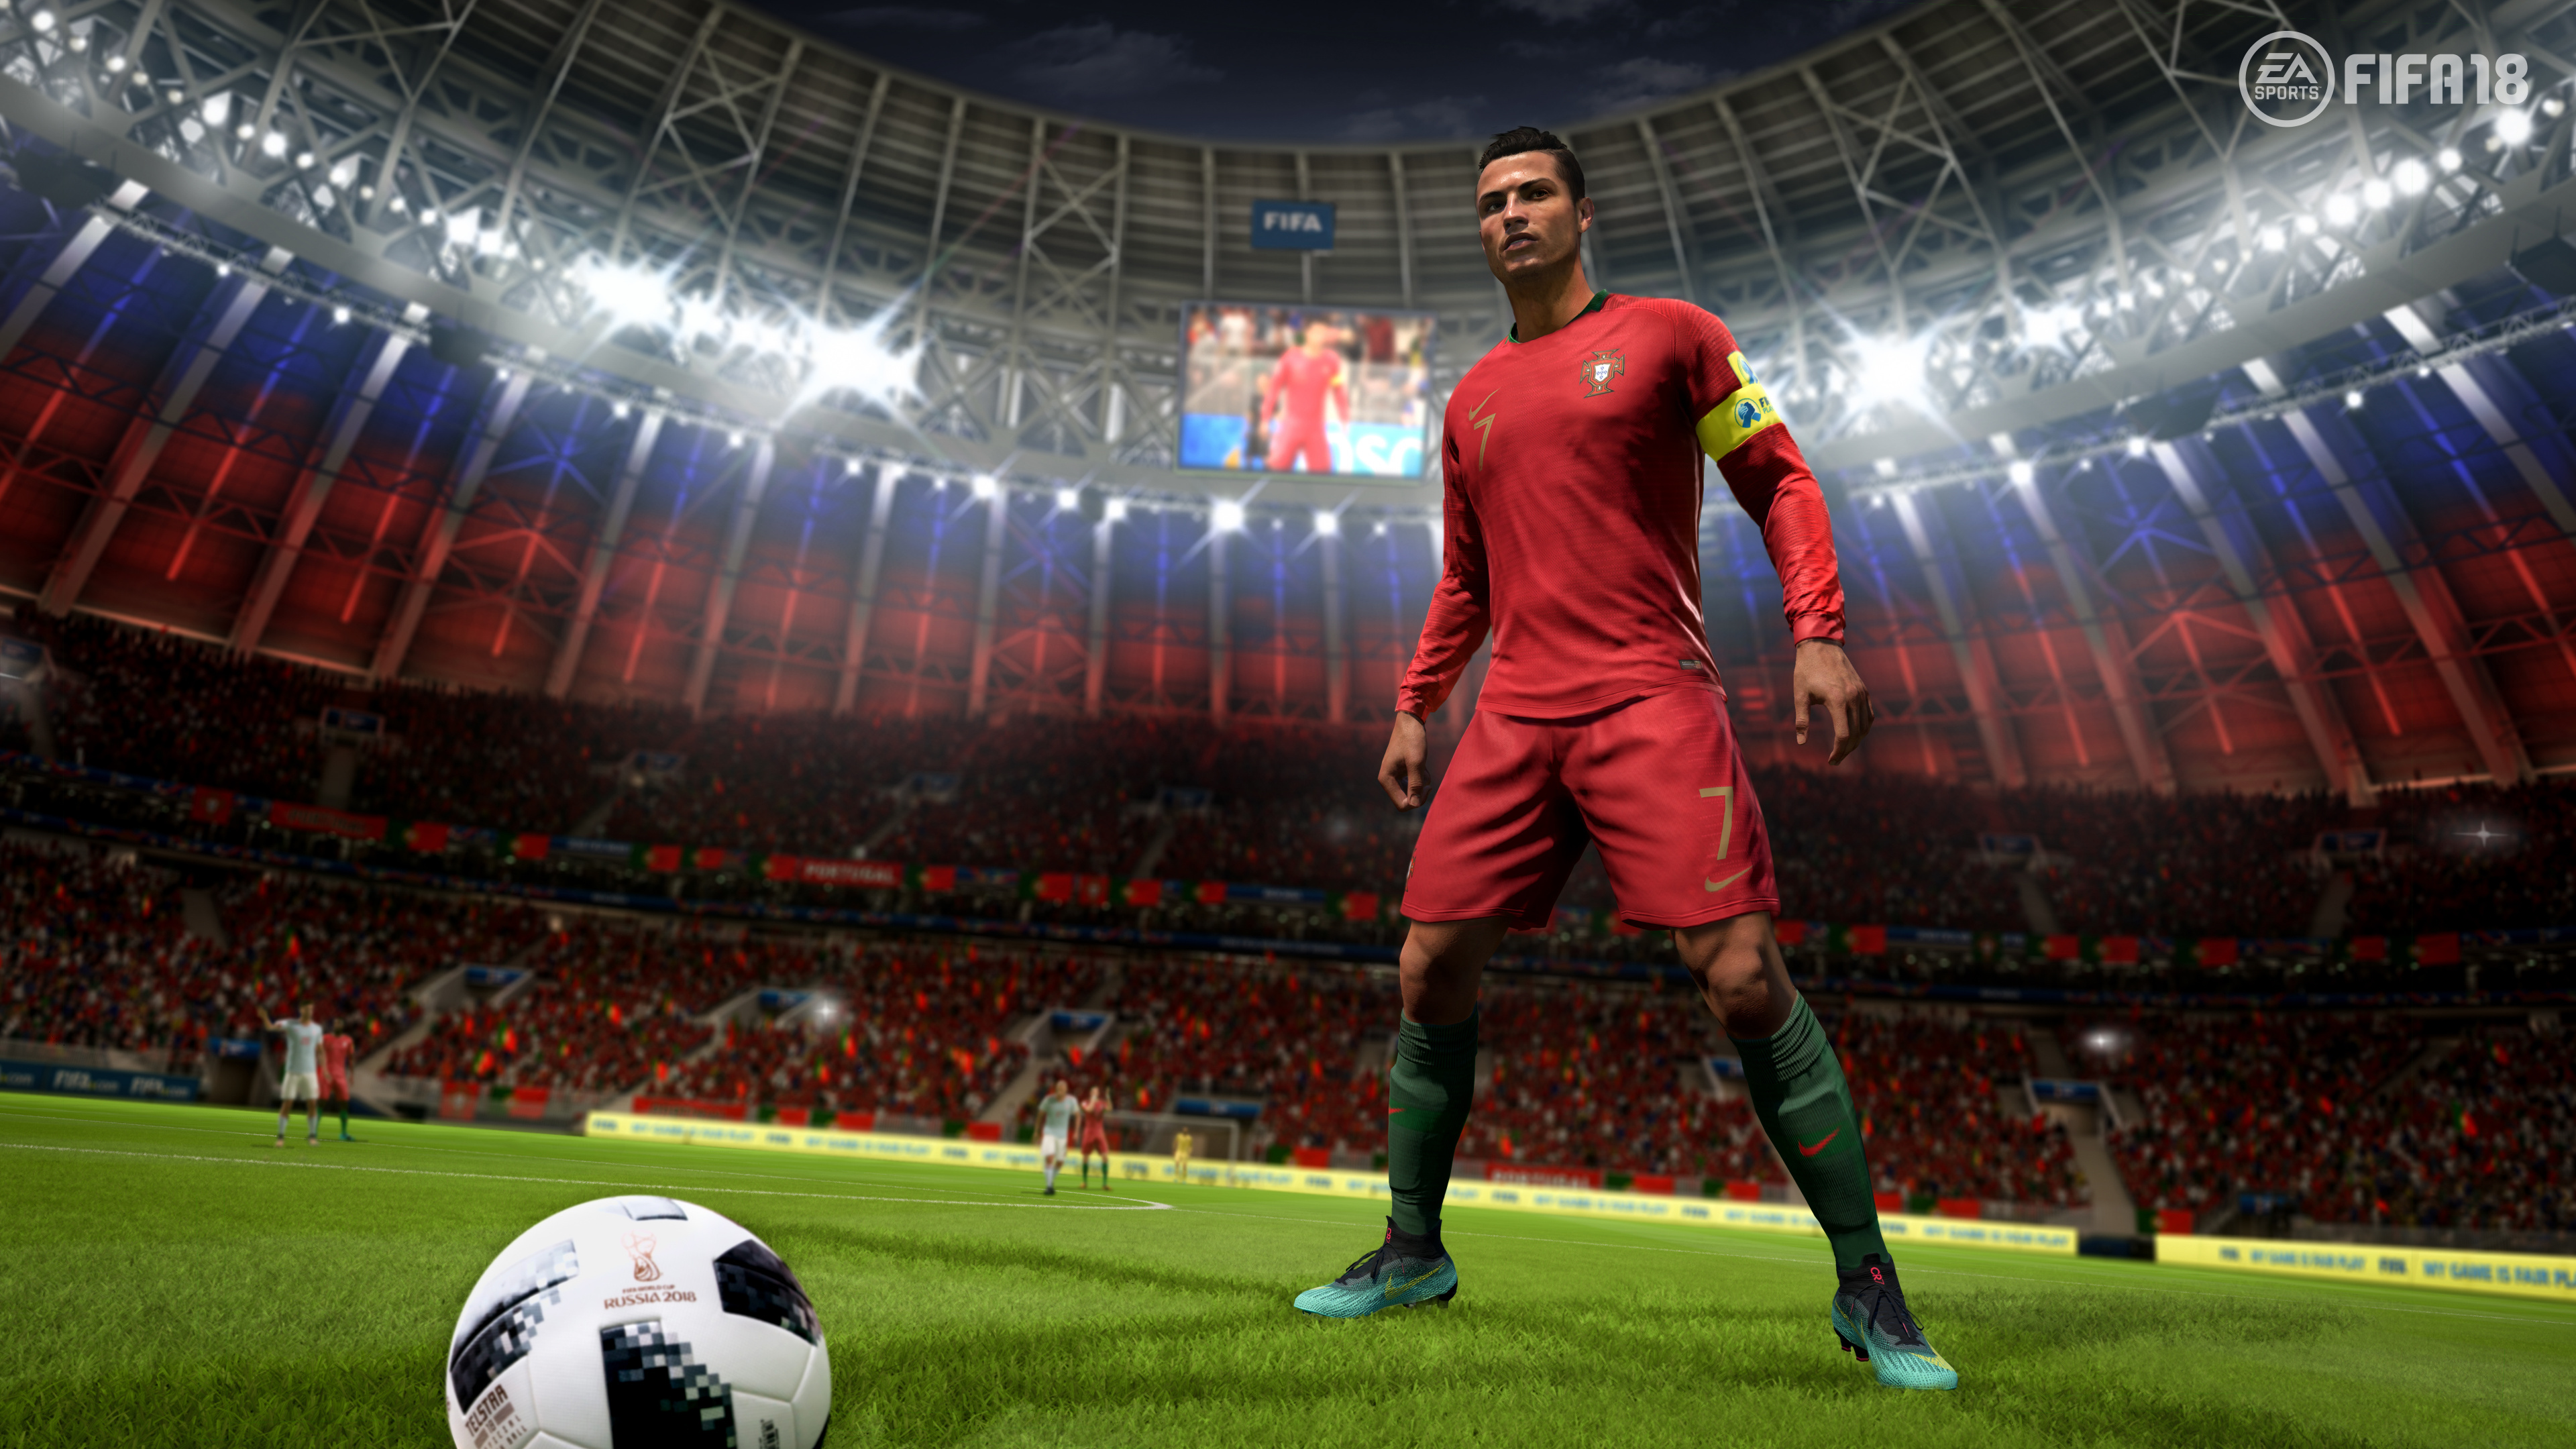 FIFA 18, 2018 World Cup, ea Sports, Electronic Arts, Playstation 4. Wallpaper in 3840x2160 Resolution